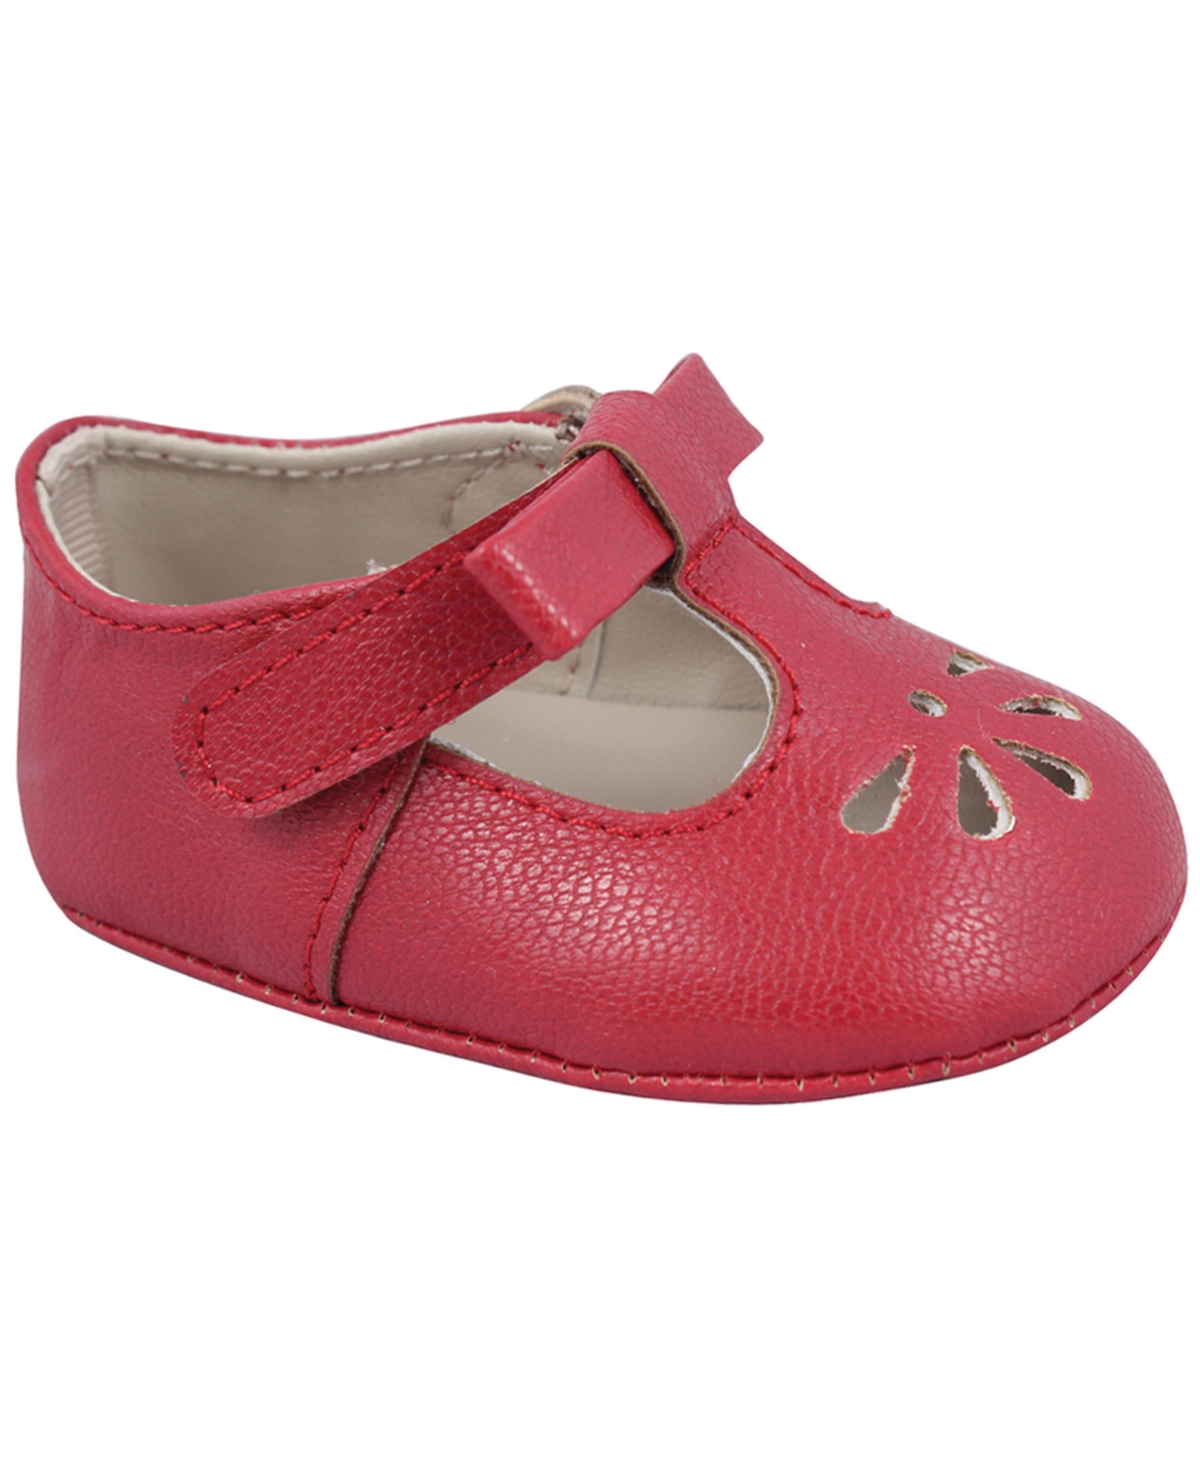 Baby Deer Baby Girl Soft Leather-like T-strap With Bow And Perforation In Red